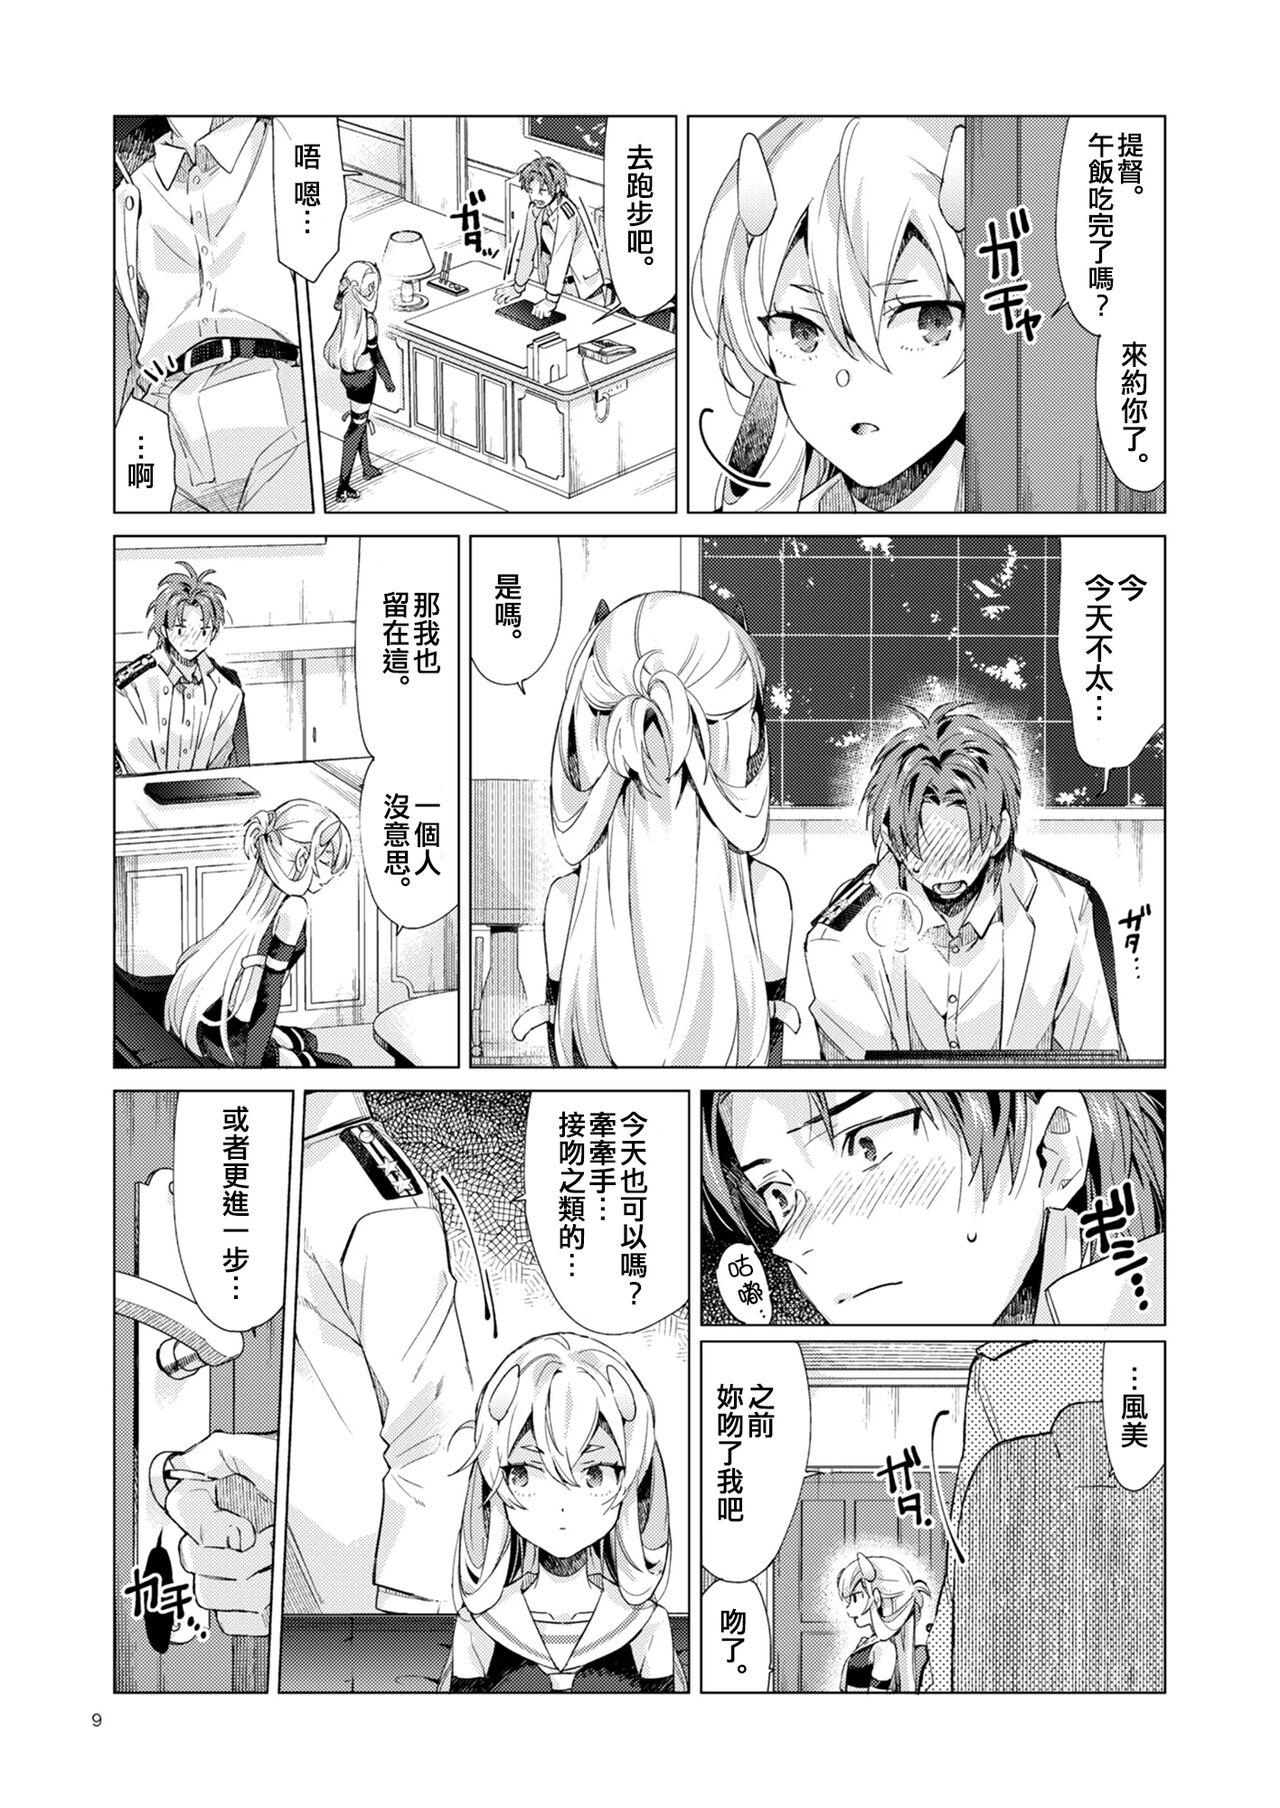 Colombia Fuumi Holic - Kantai collection Full - Page 9